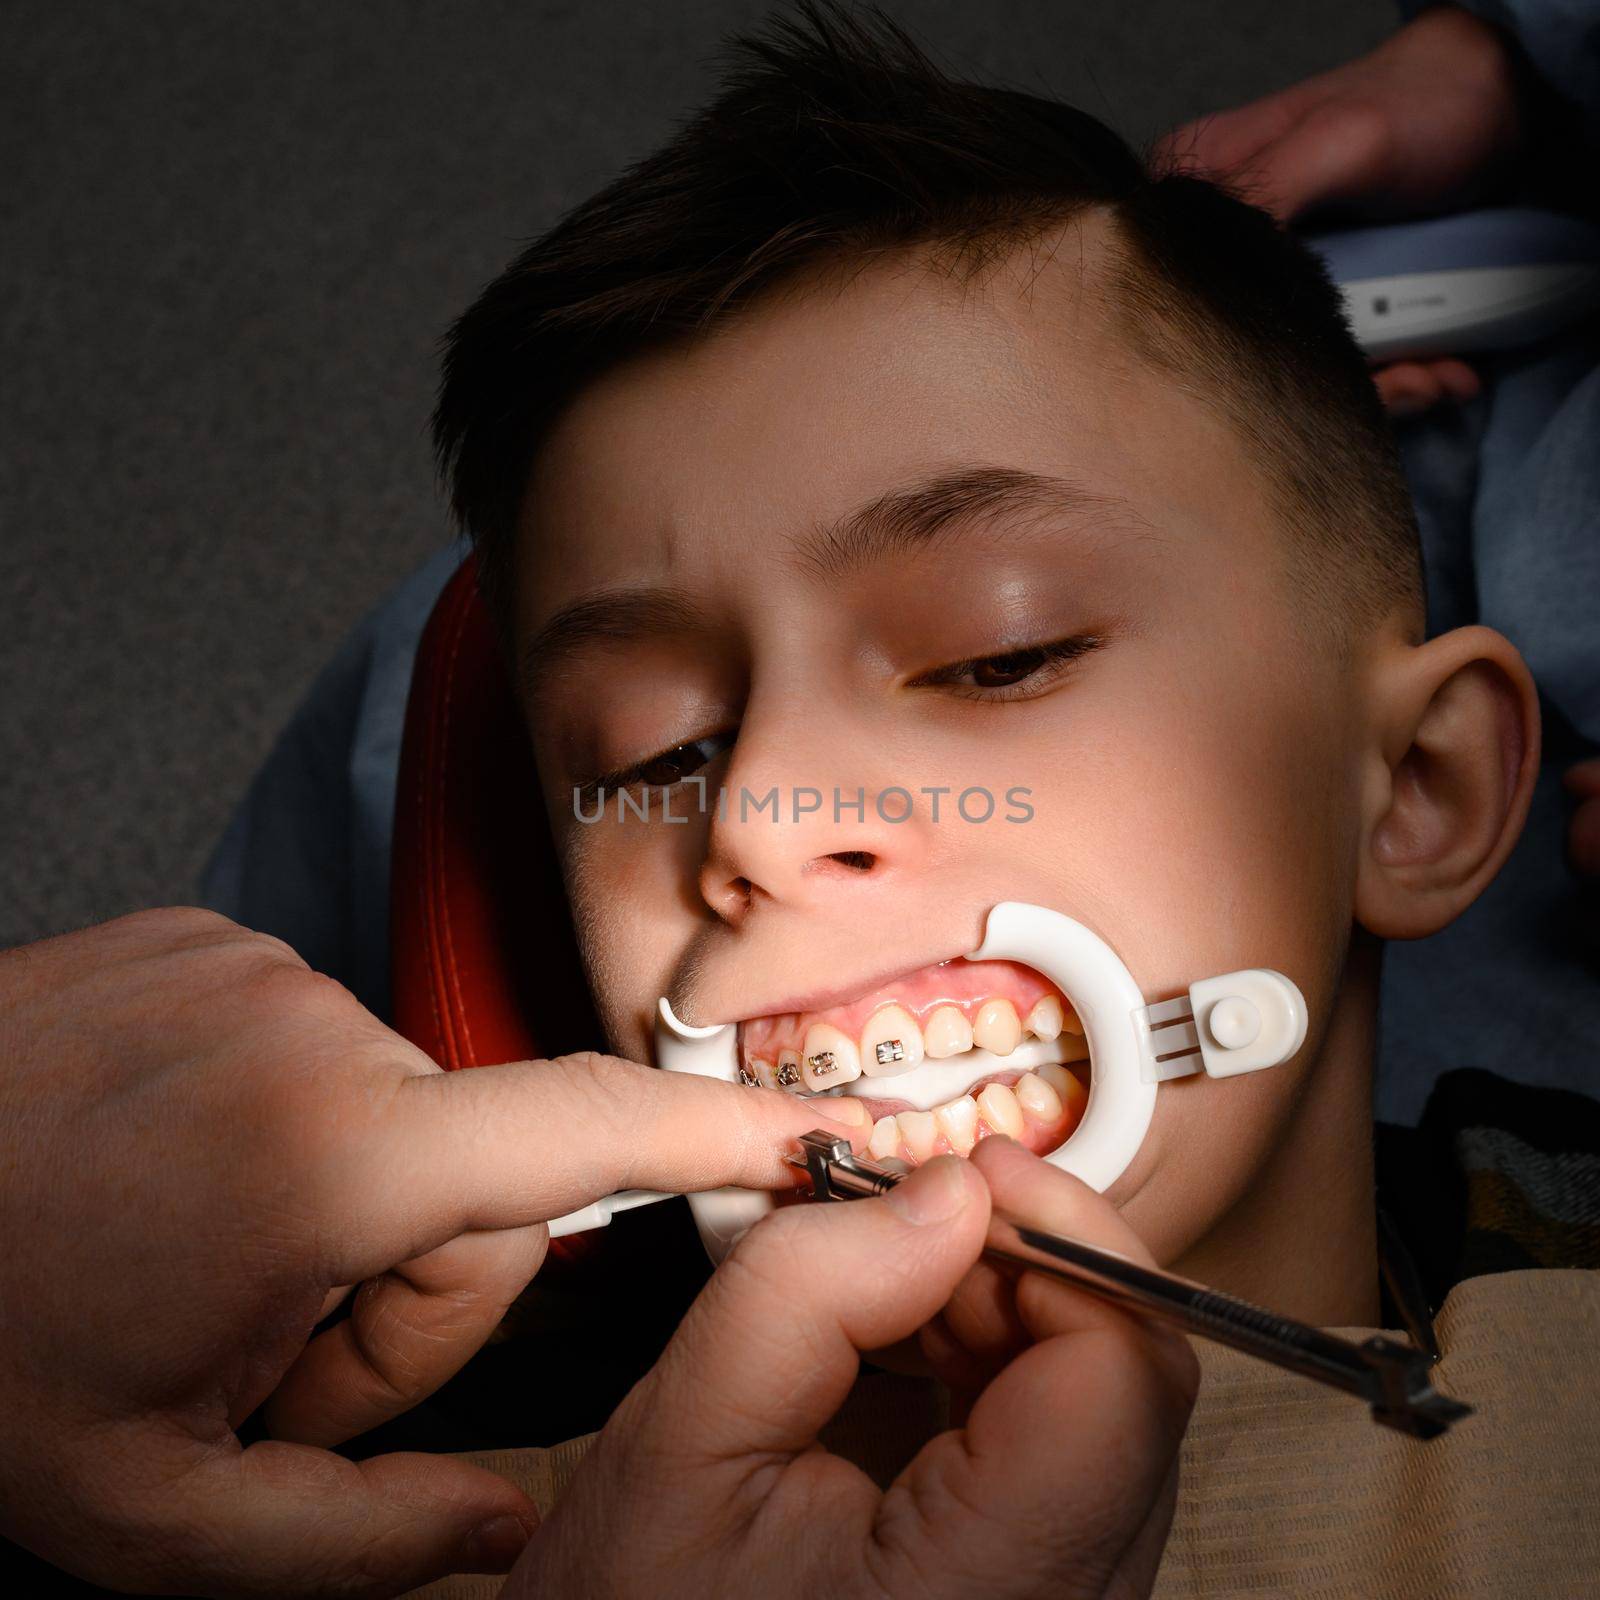 Close up of installing braces on teeth, aligning teeth with braces, retractor on lips, visit to dentist.